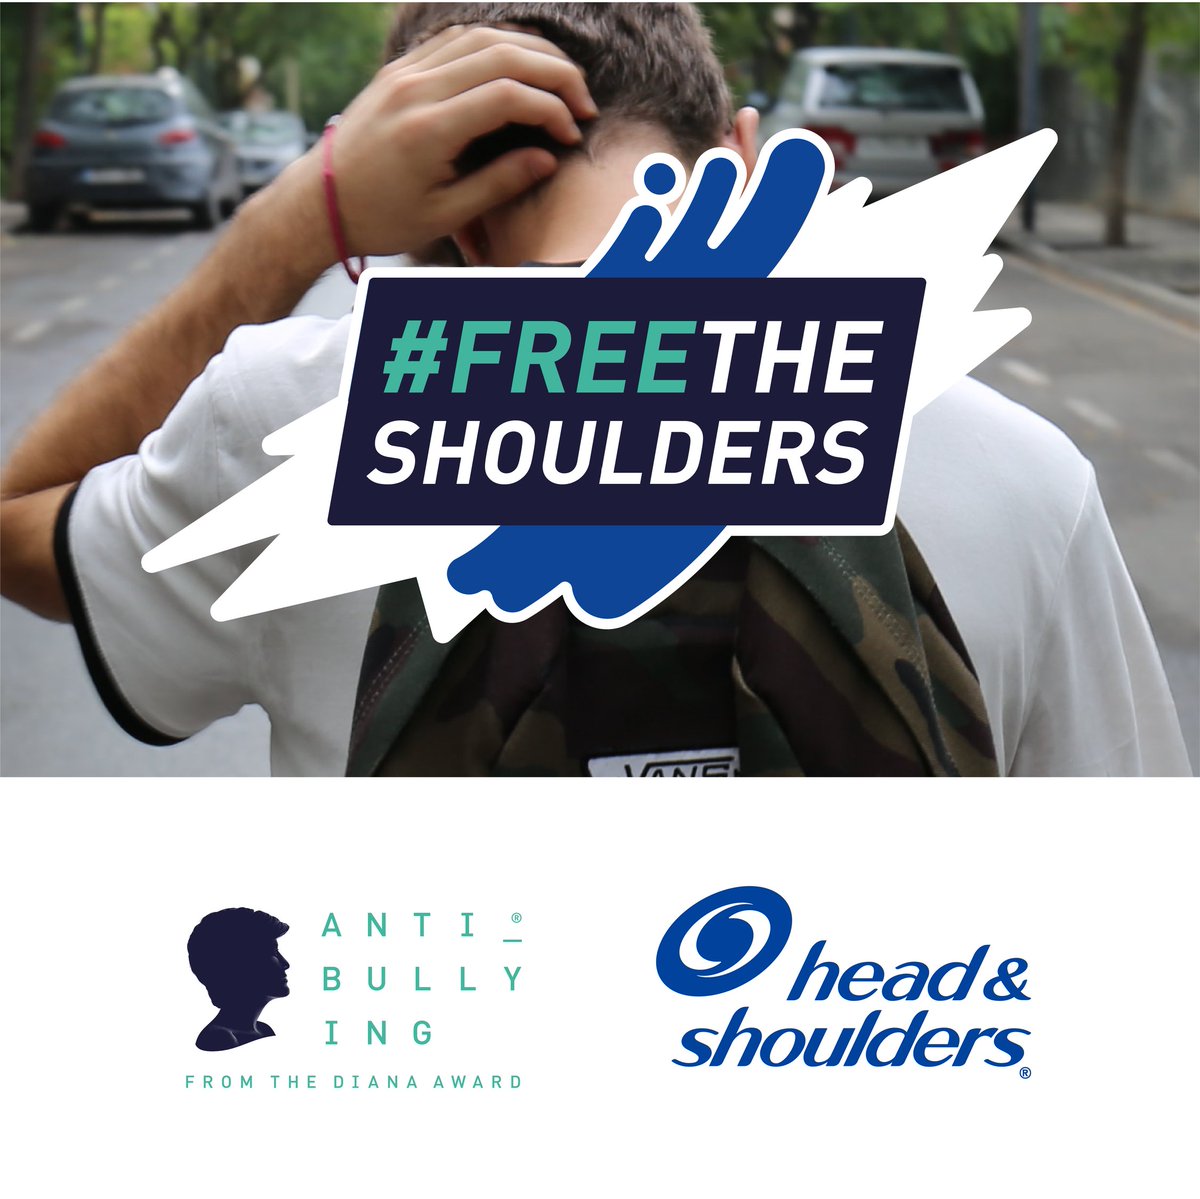 We support The @DianaAward‘s @AntiBullyingPro
campaign with @Headshoulders to educate 1 million
young people, parents and adults on how to fight all
forms of bullying including dandruff related bullying
#FreeTheShoulders
antibullyingpro.com/freetheshoulde…